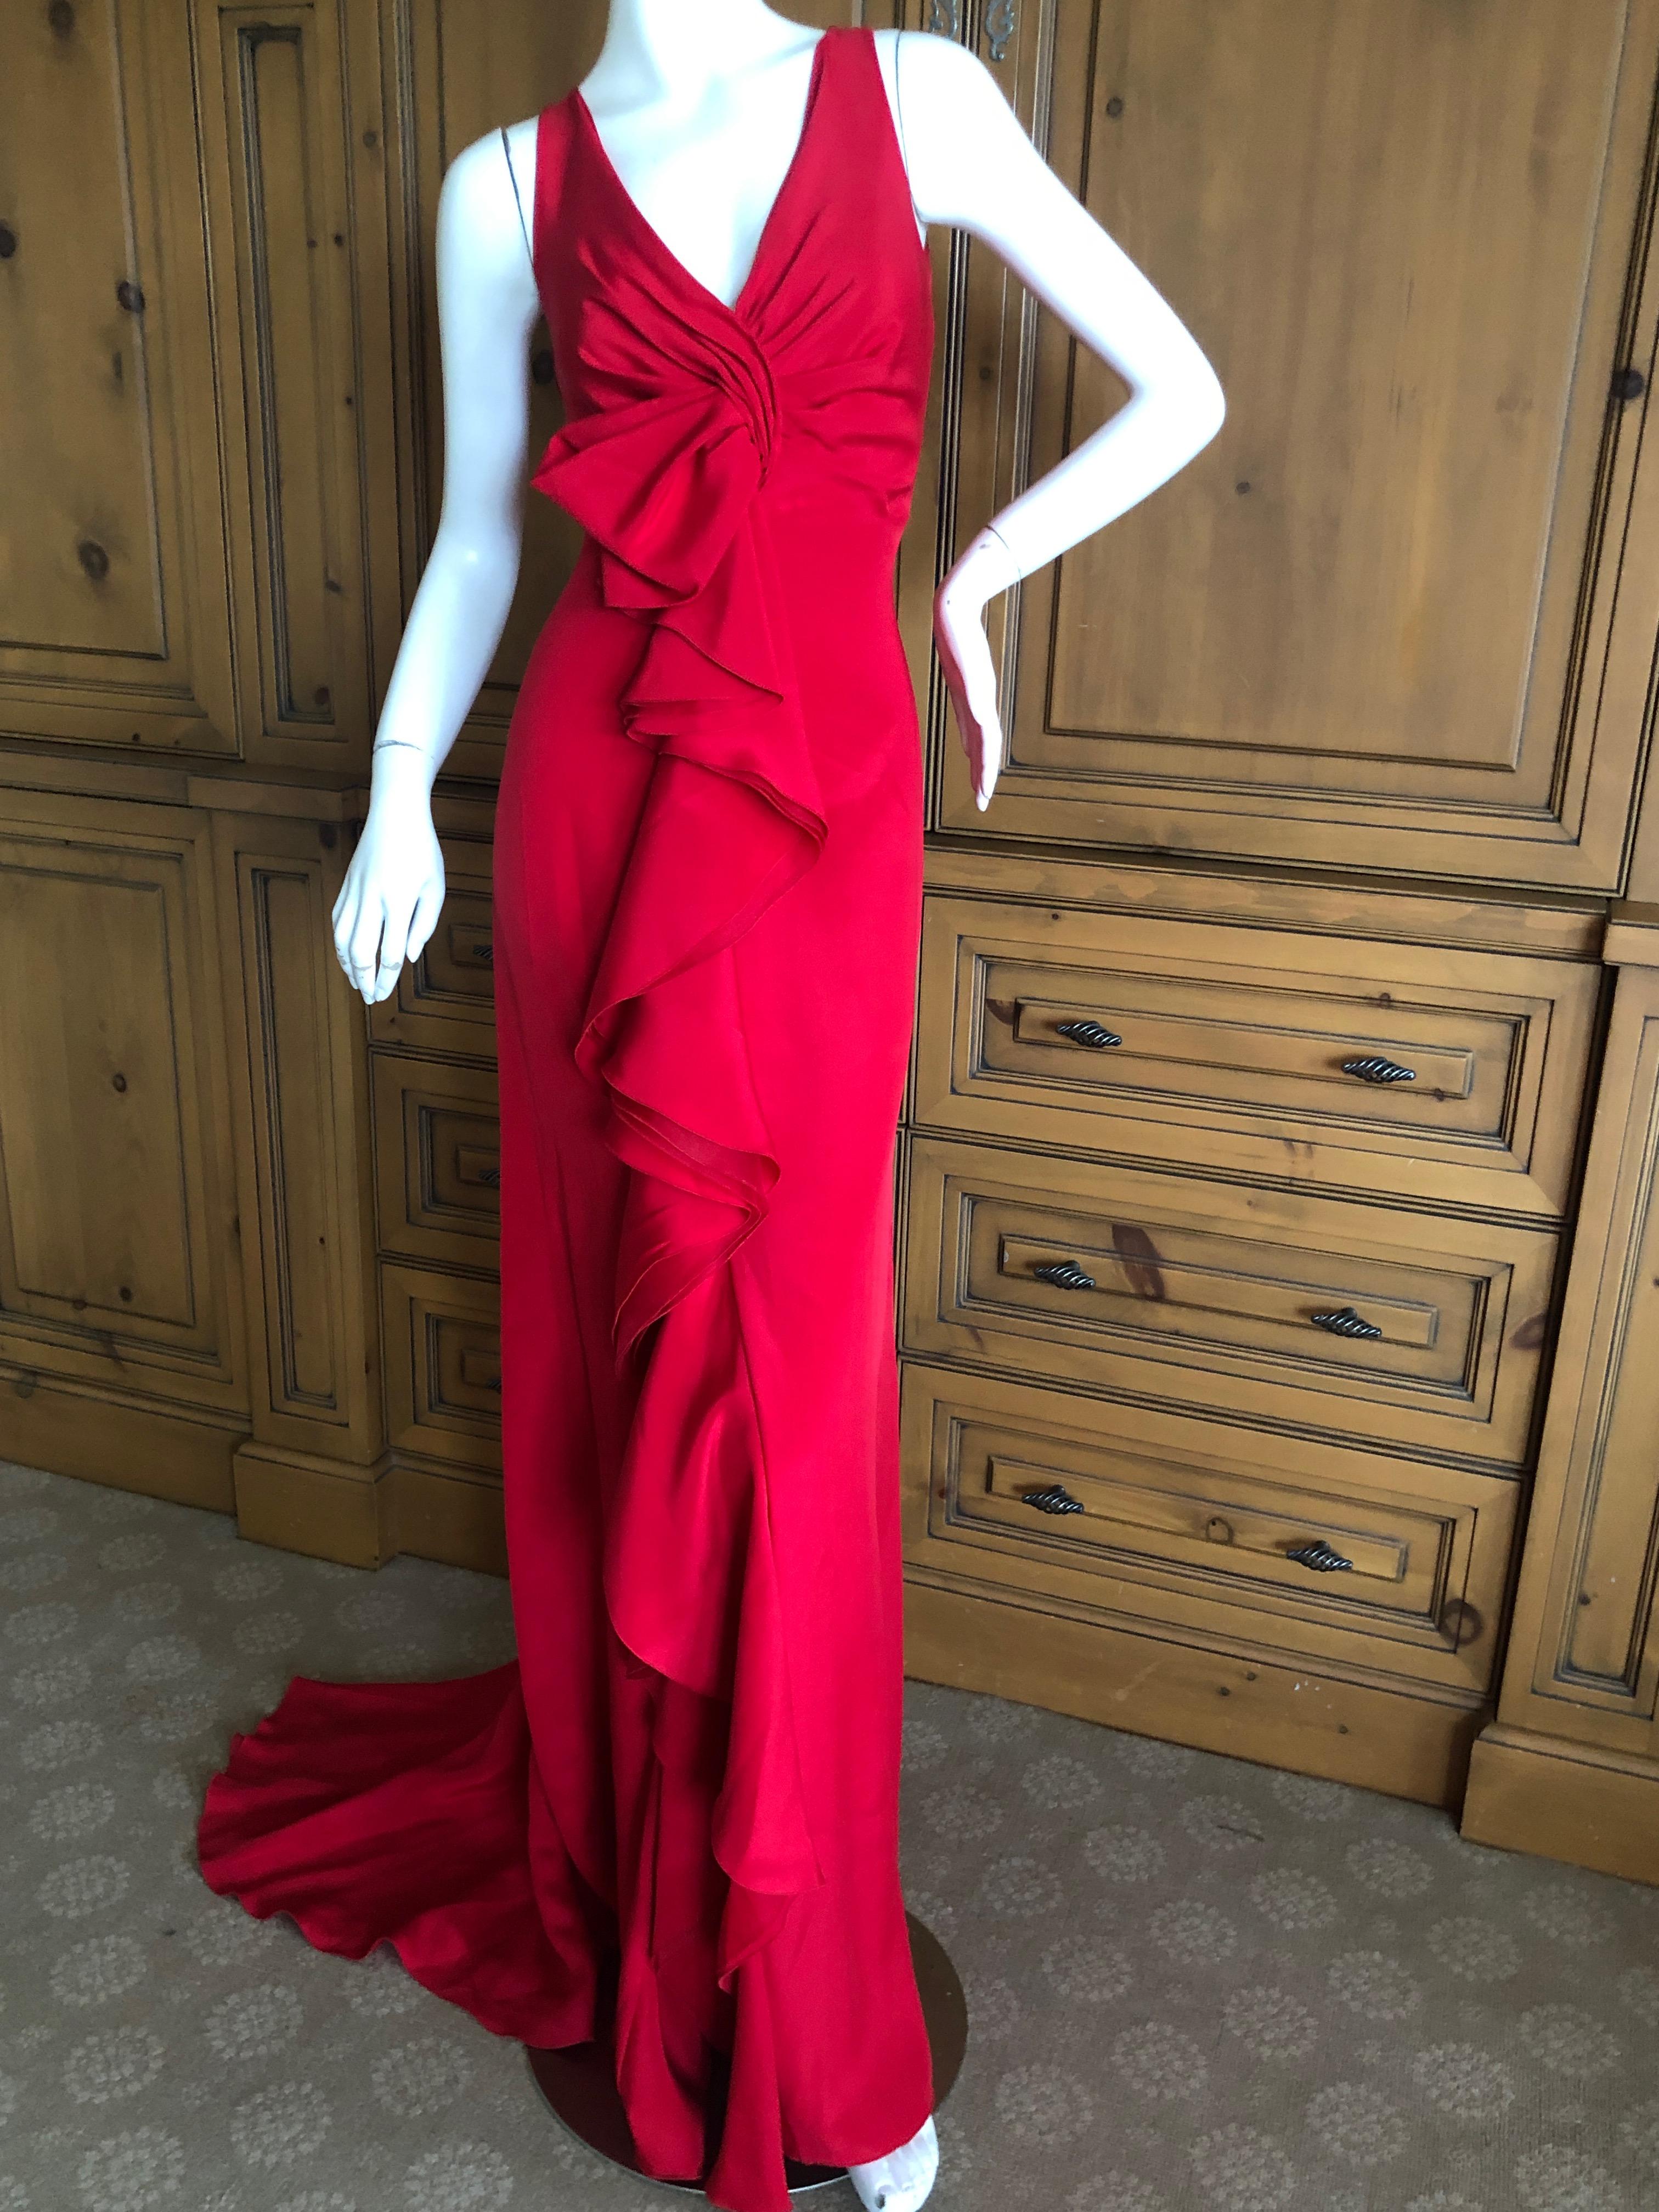 Valentino Vintage Signature Red Low Cut Silk Chiffon Evening Dress with Train
This is such a charming piece.
Size 8

Bust  36